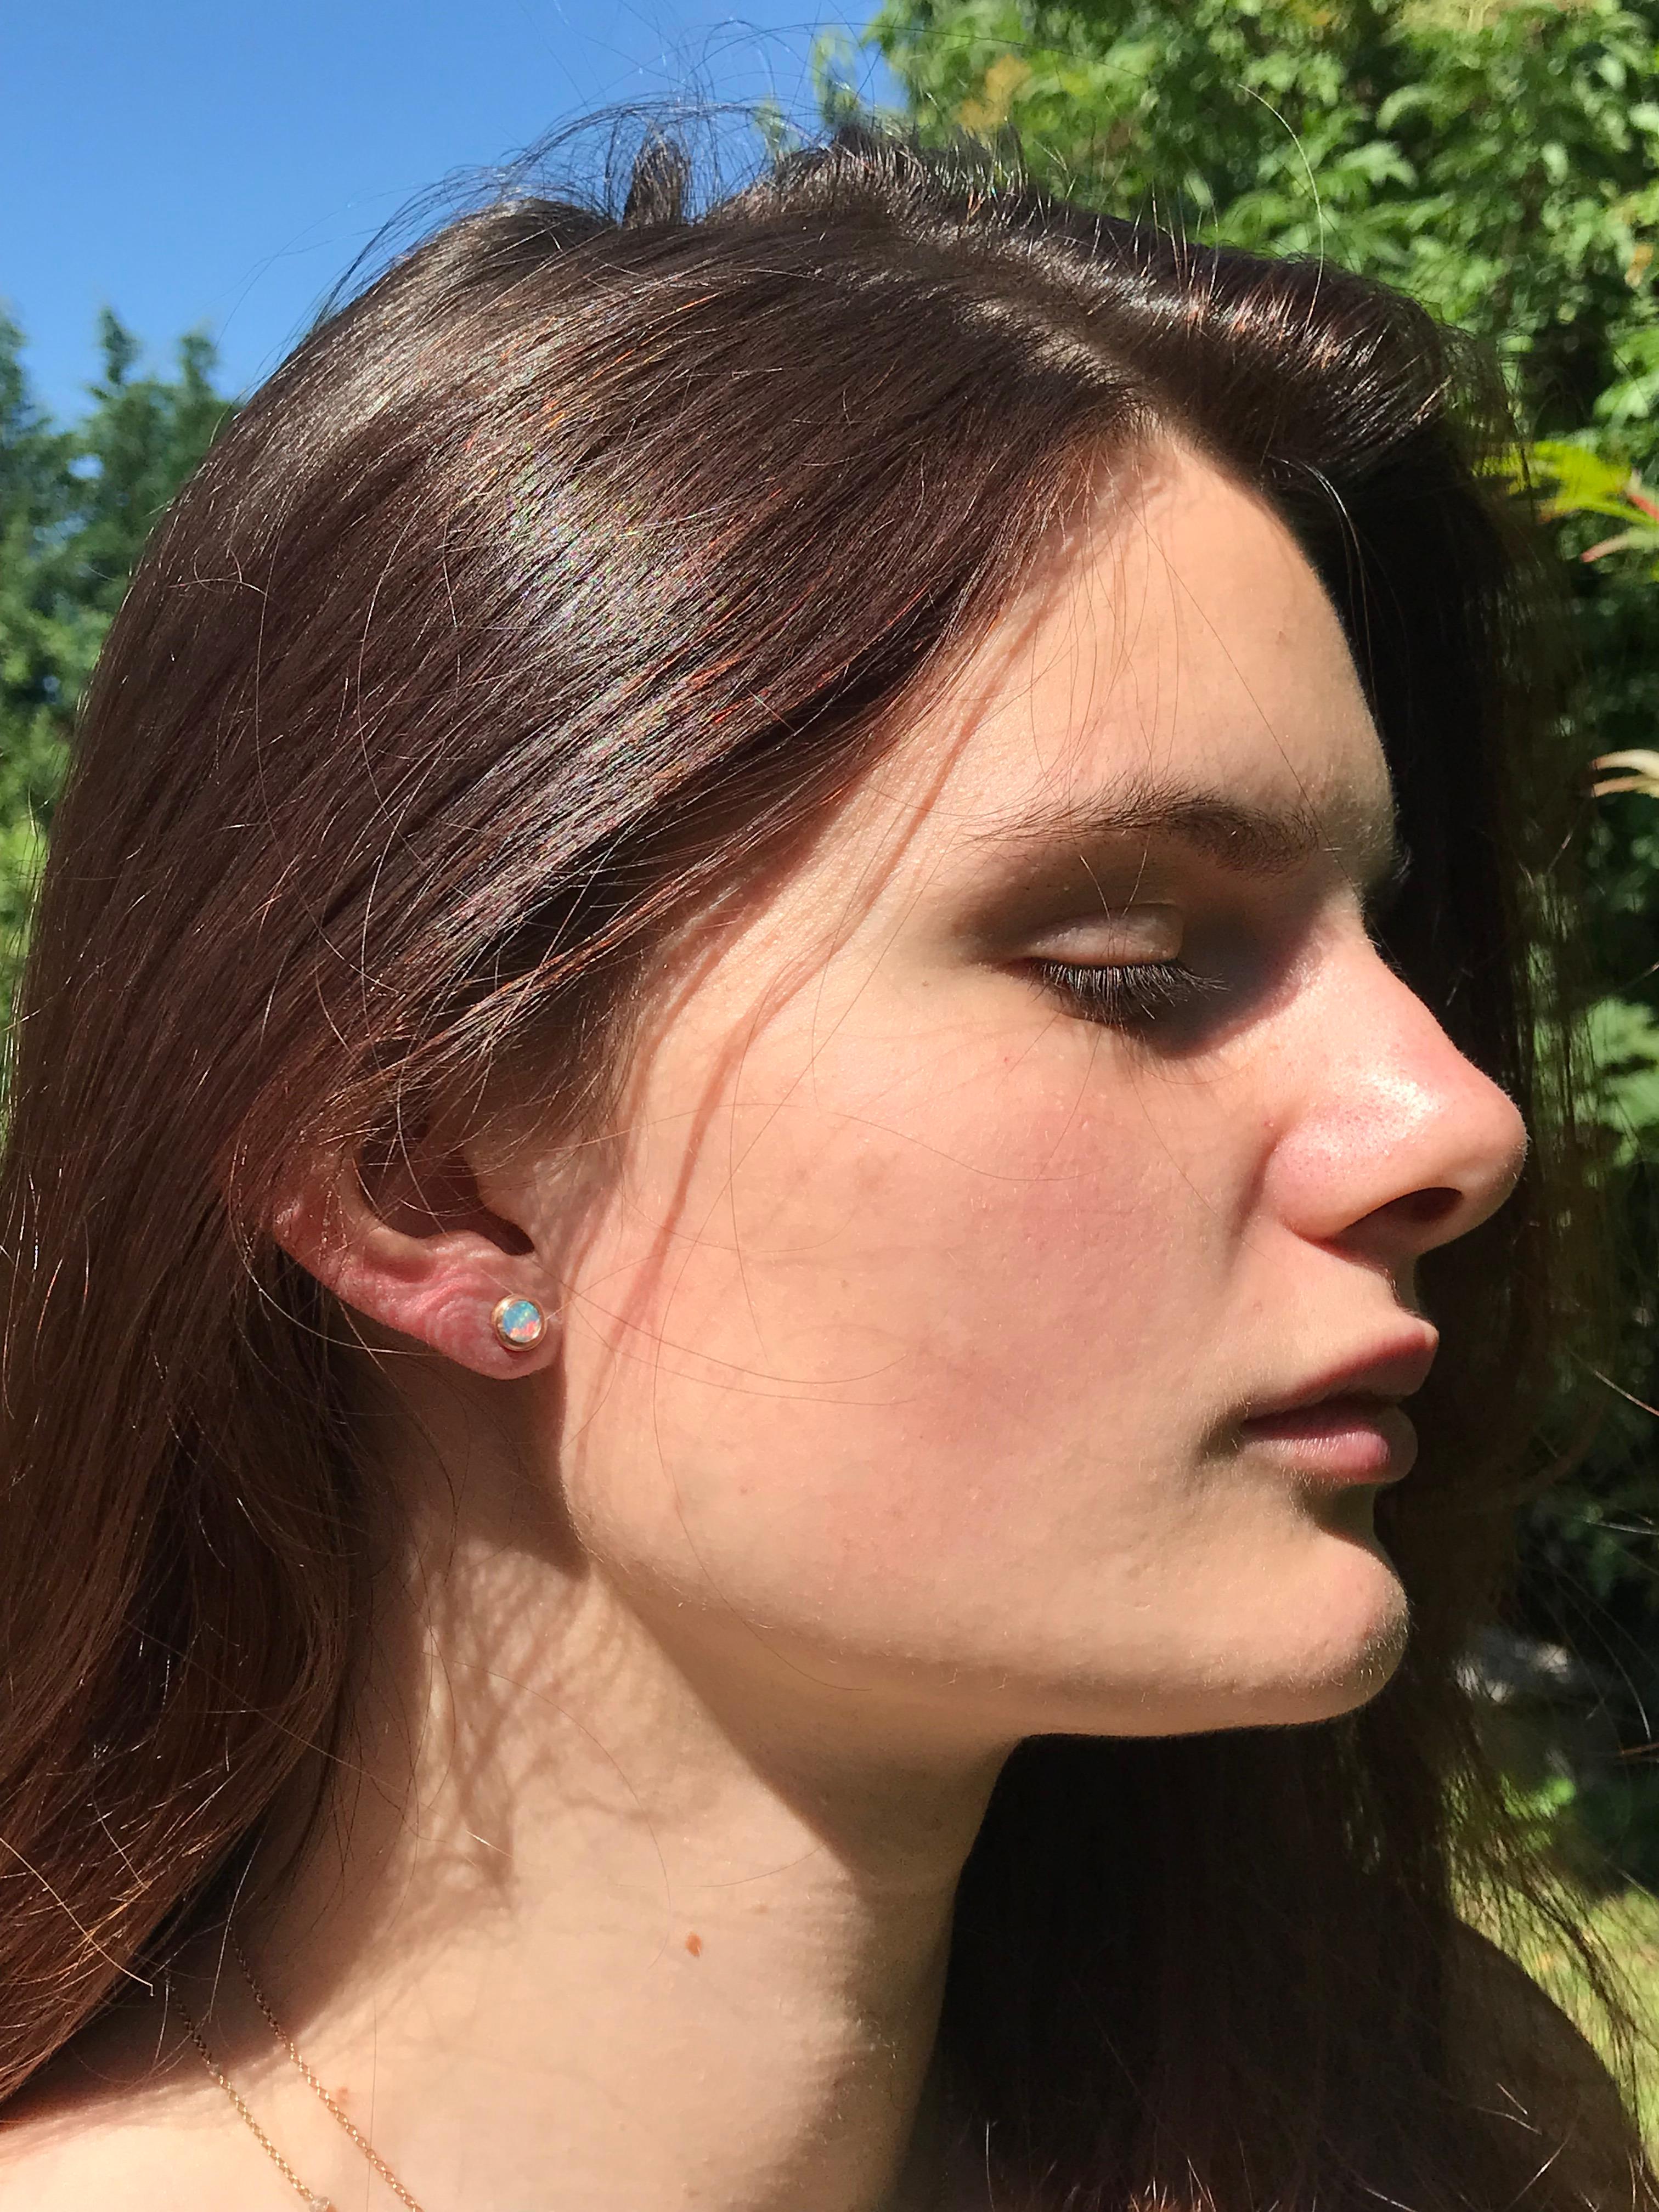 Dalben design  18k rose gold matte finishing stud earrings with two bezel-set round cabochon pink-blue Australian solid opals weight 0,4 carats . 
Bezel stone dimensions  6,7 mm .
The earrings has been designed and handcrafted in our atelier in Como